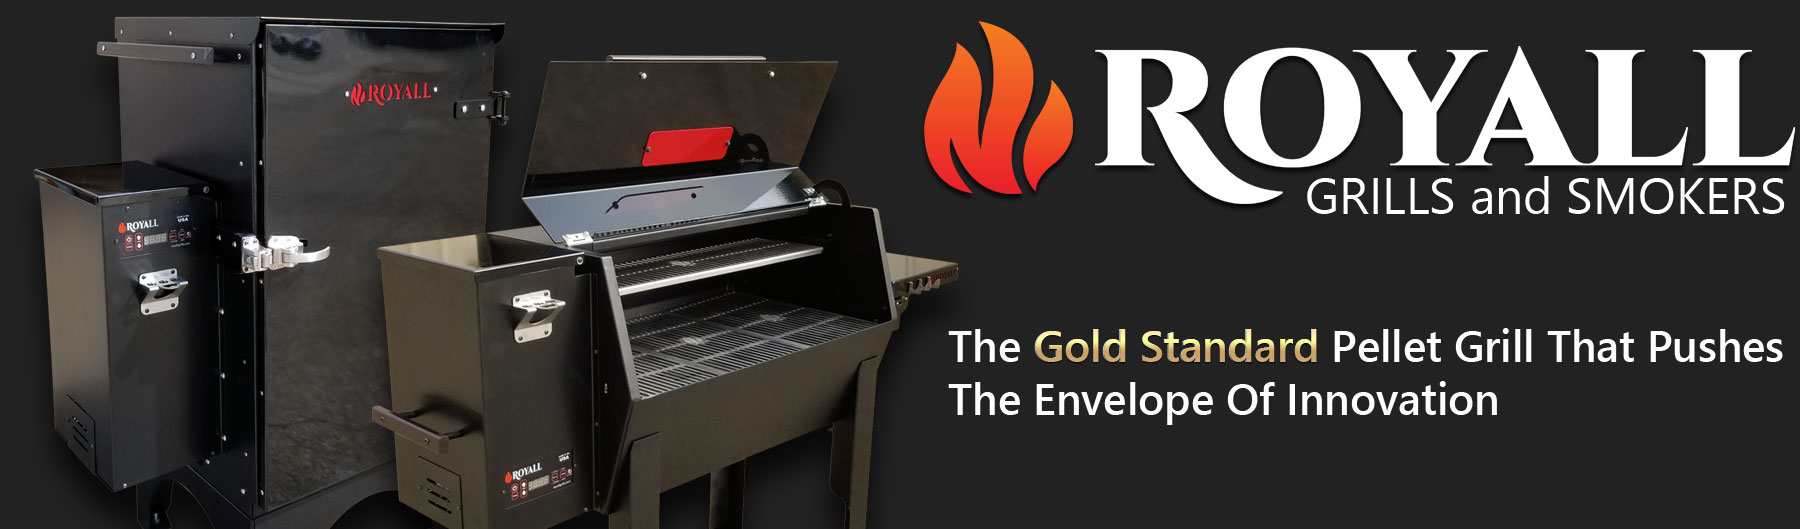 Royall Wood Pellet Grills and Smokers